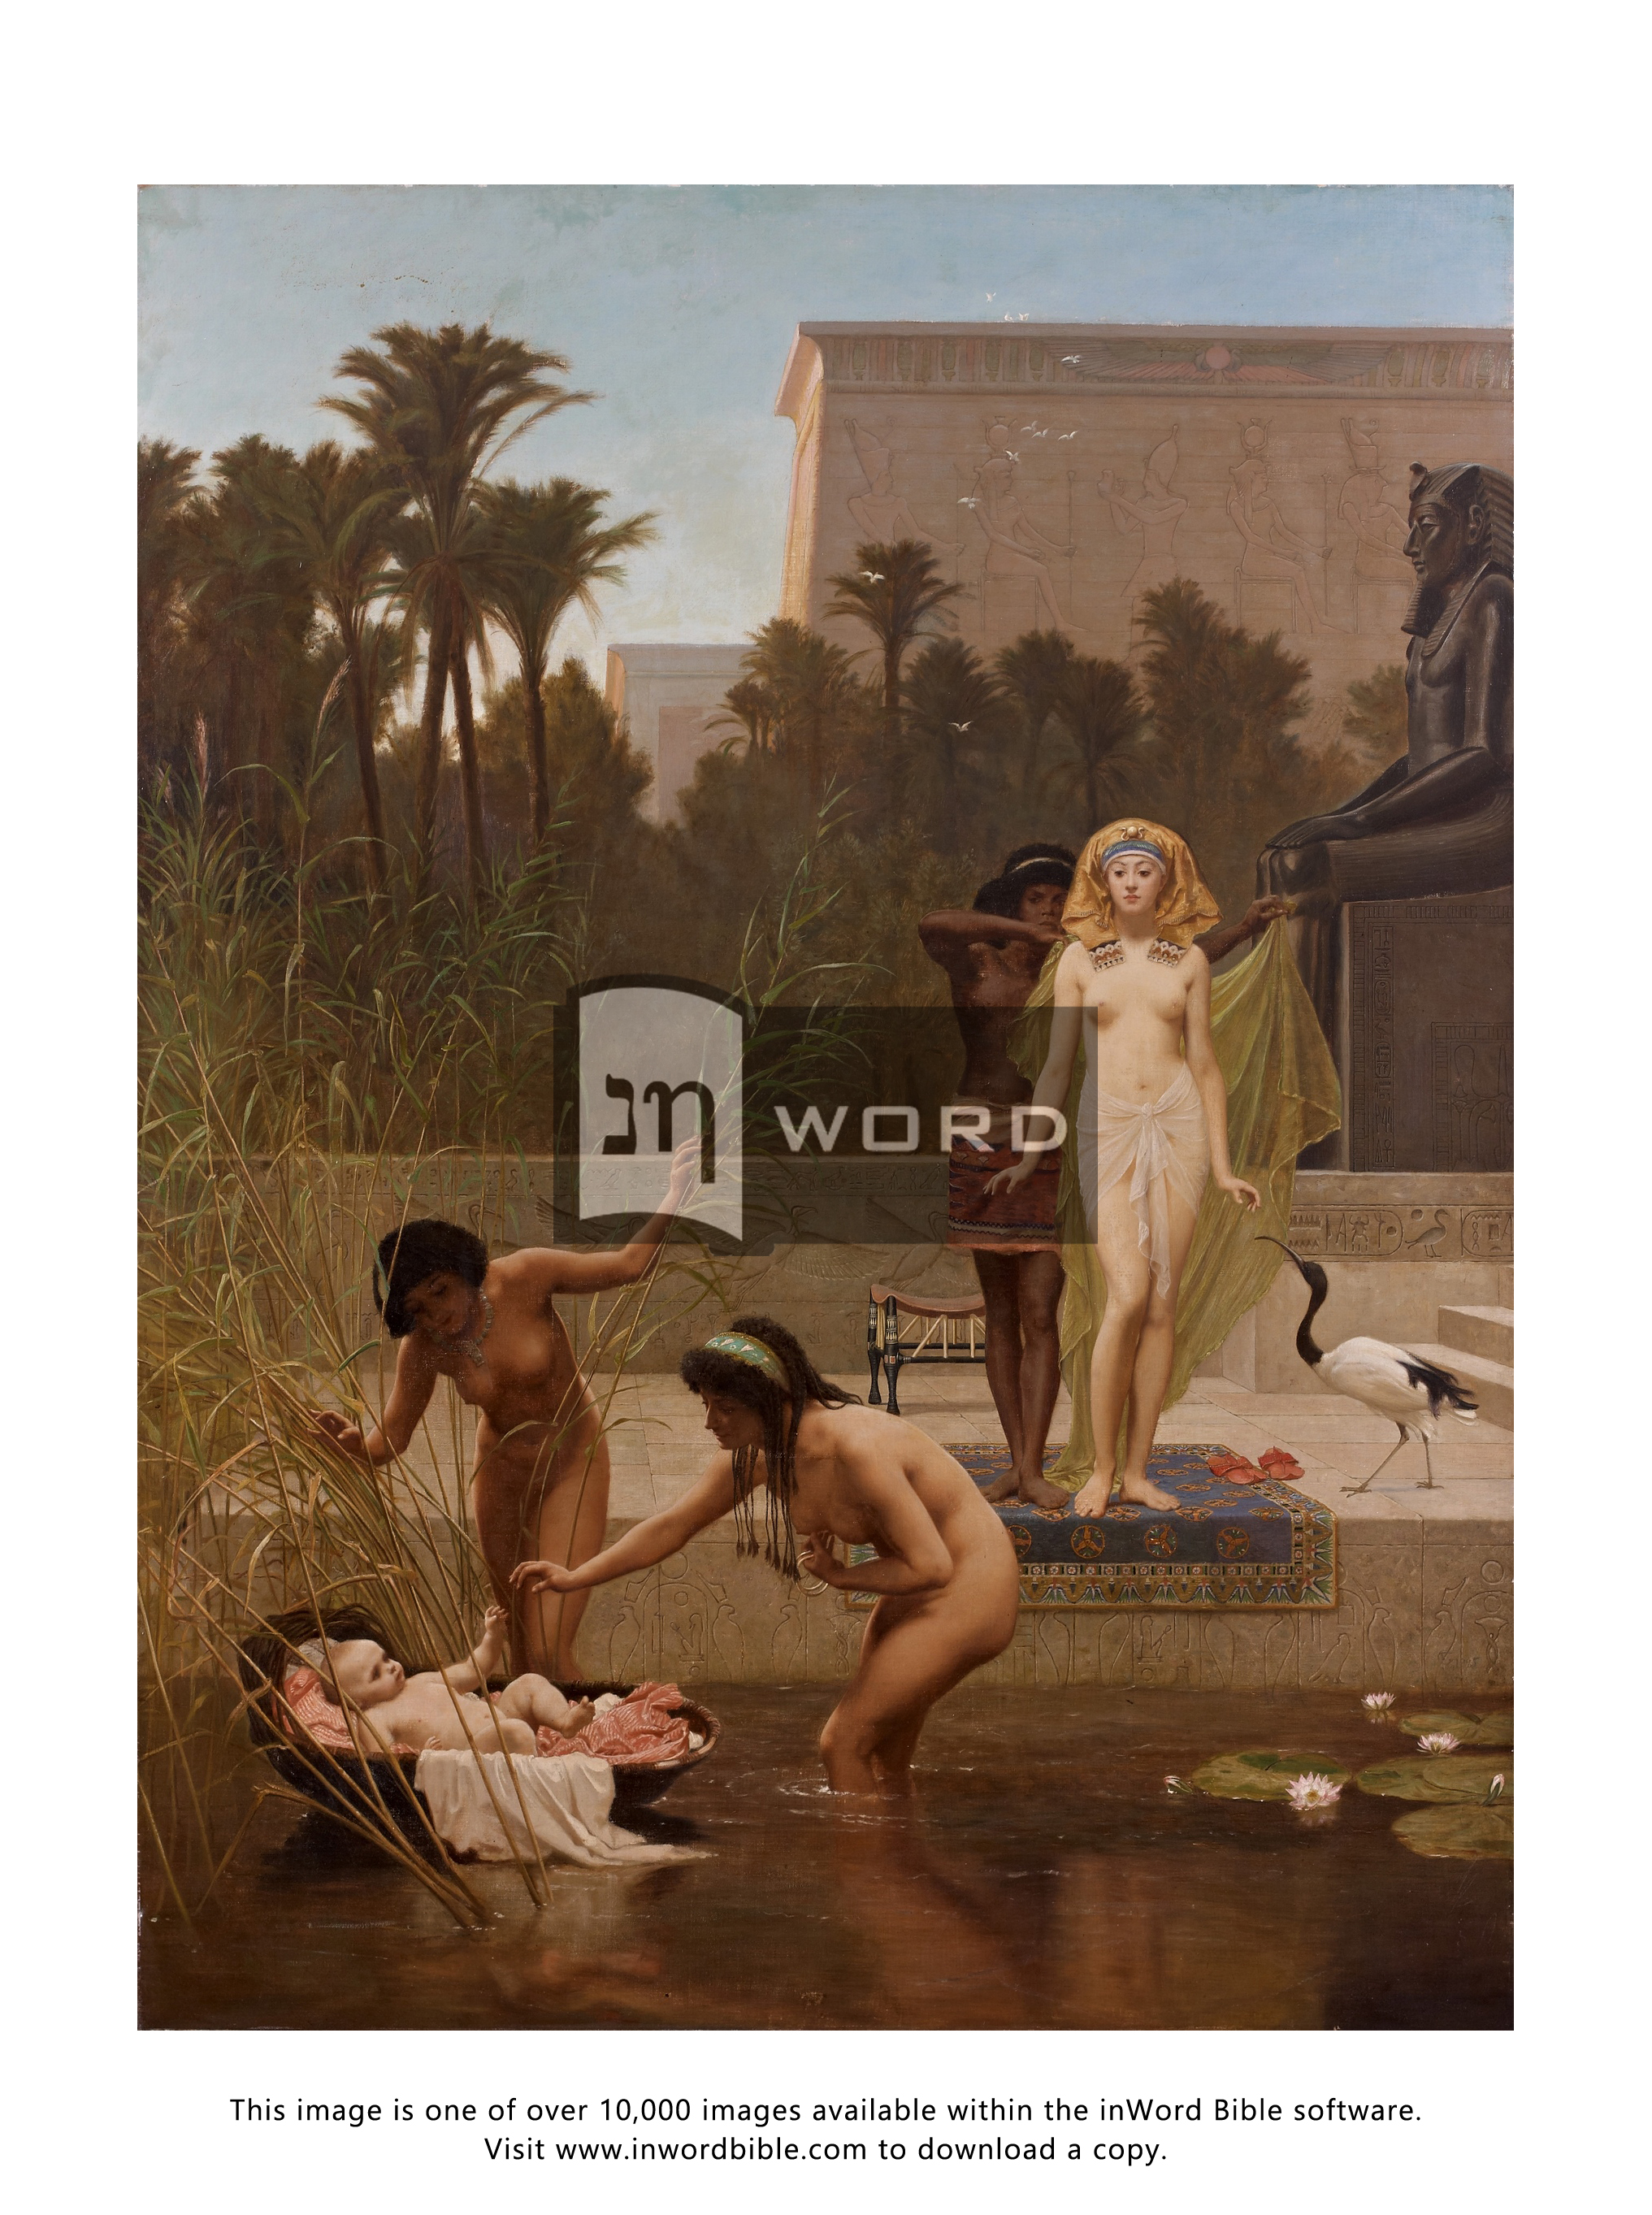 Bible image of Moses, Moses in the bulrushes, Baby Moses, Pharaoh's daughter, Pharaoh's daughter finds Moses, Naked, Nude, Exodus 2:5-7, Bible images, Frederick Goodall